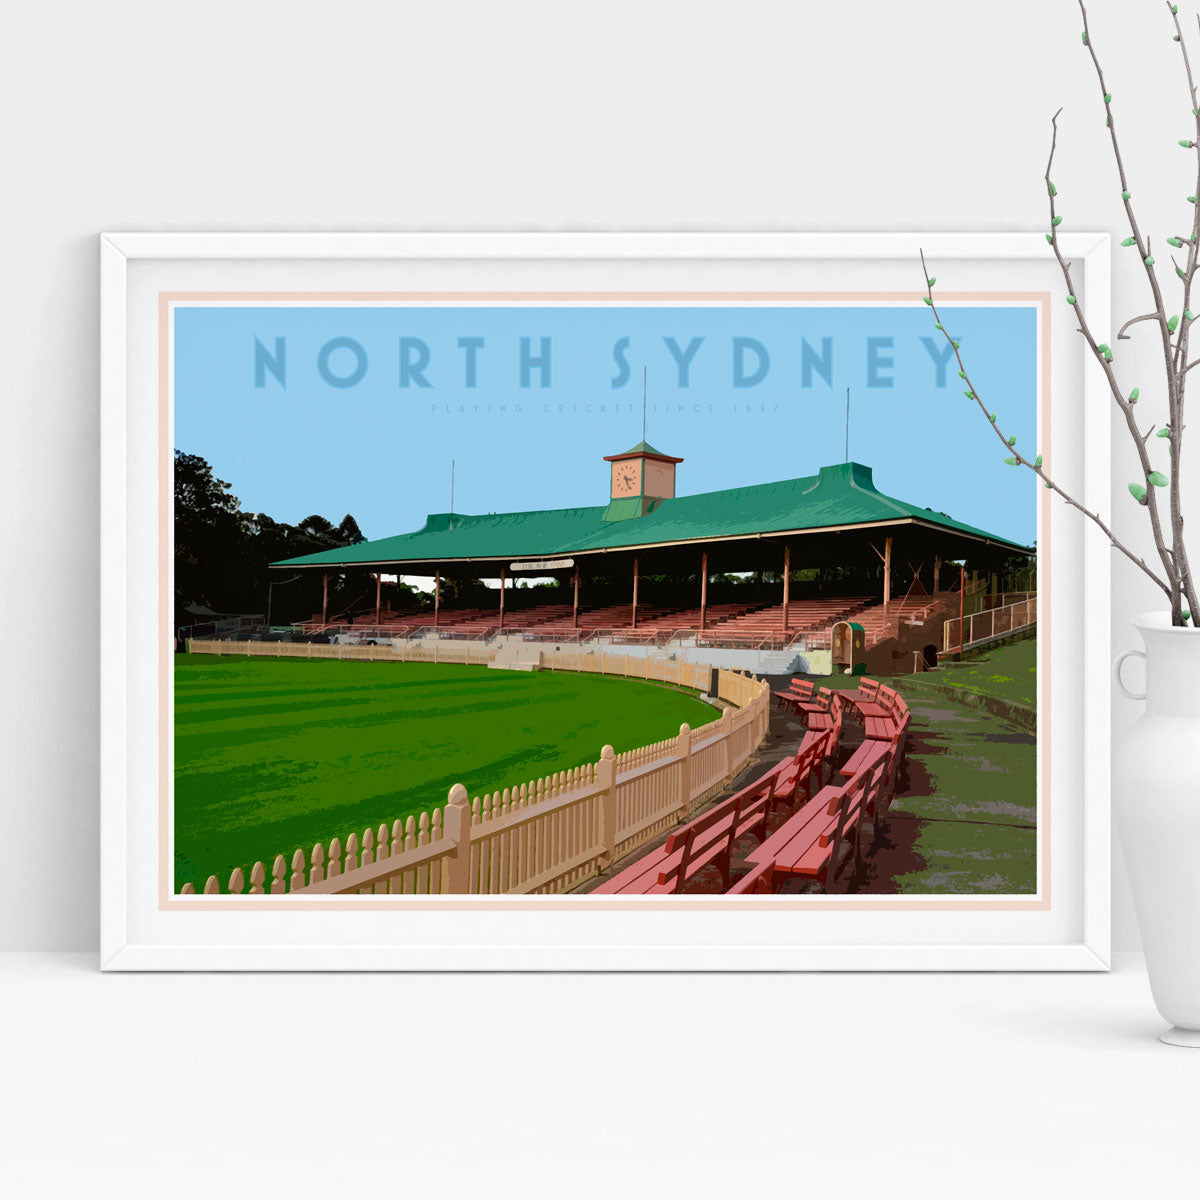 North Sydney vintage travel style poster by places we luv